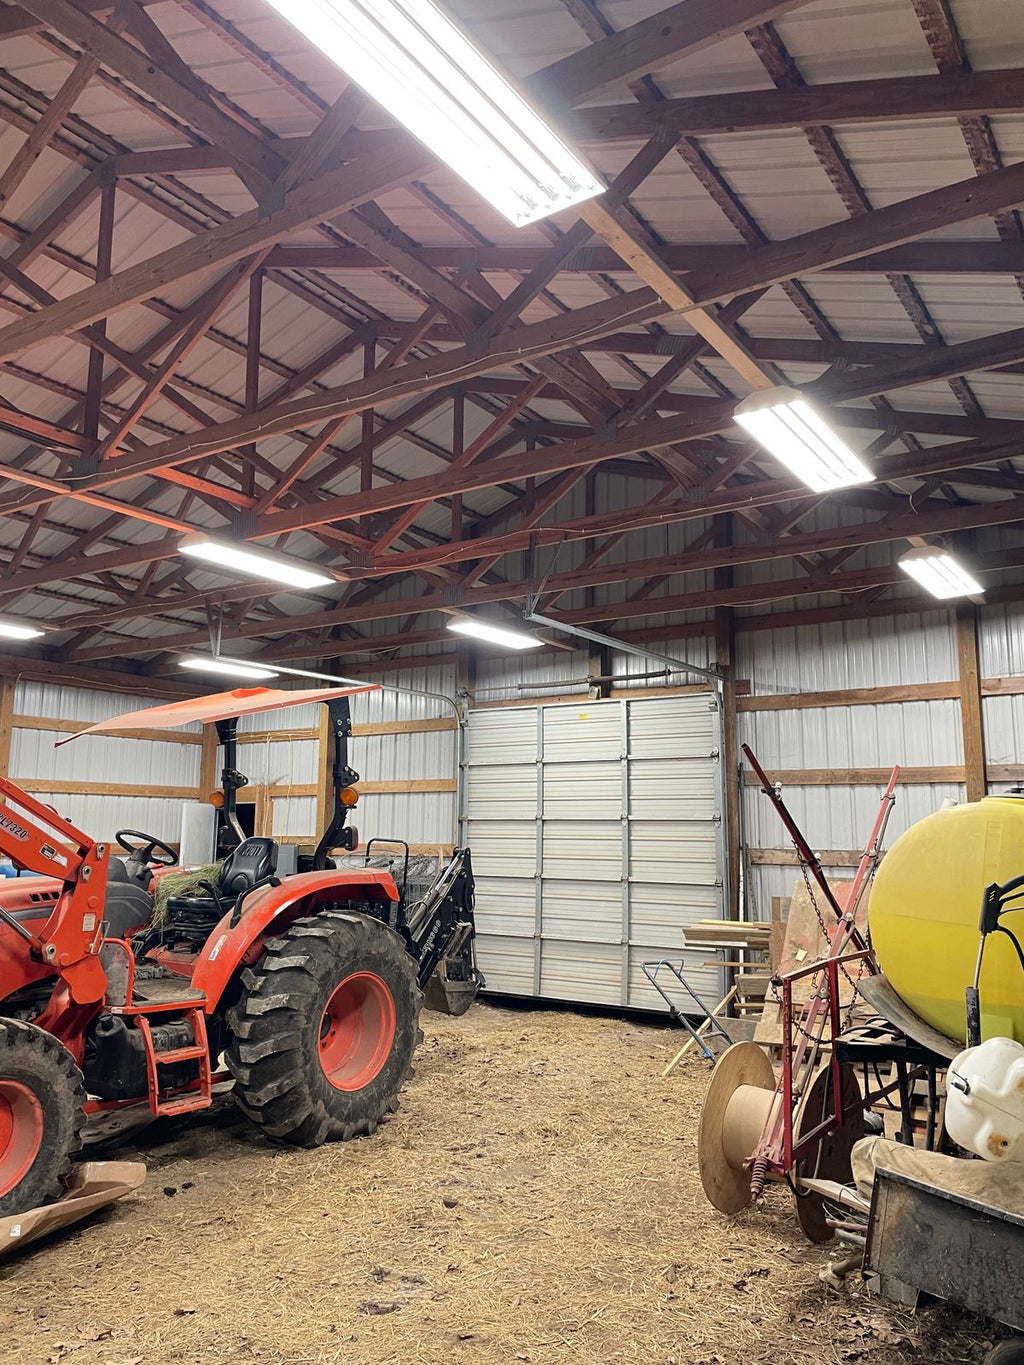 Illuminate Your Agriculture: The Best LED Lighting Solutions for Farms, Ranches, and Barns